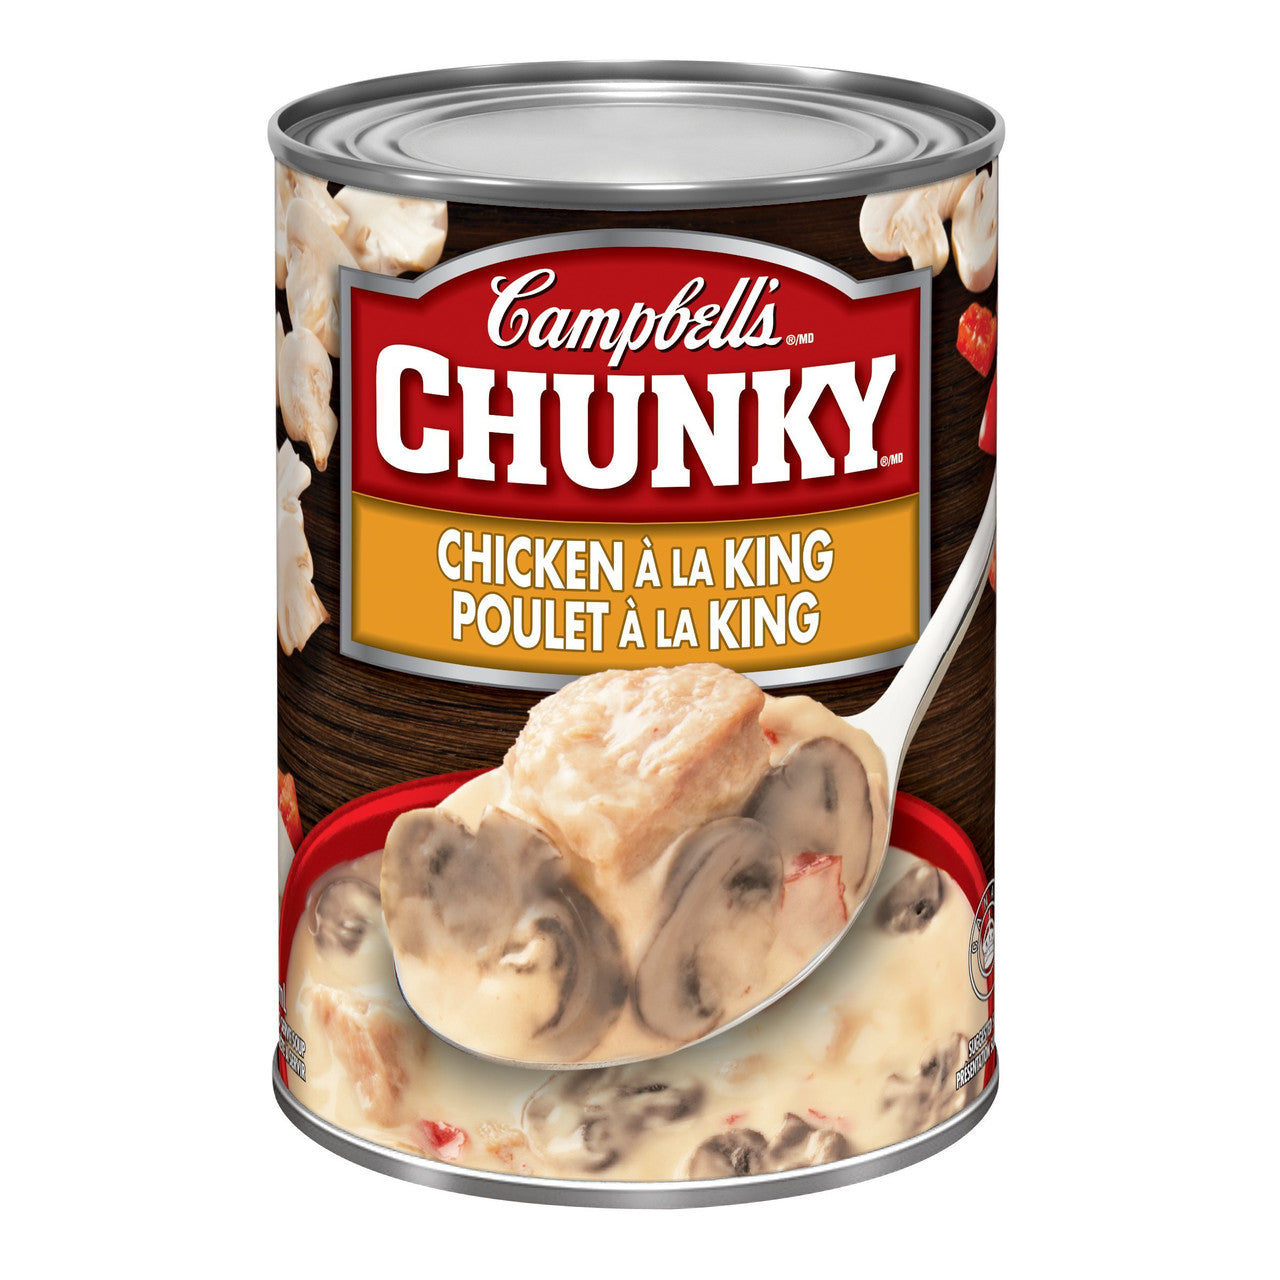 Campbell's Chunky Chicken A La King Soup, 540ml/18.3 oz. (Imported from Canada)